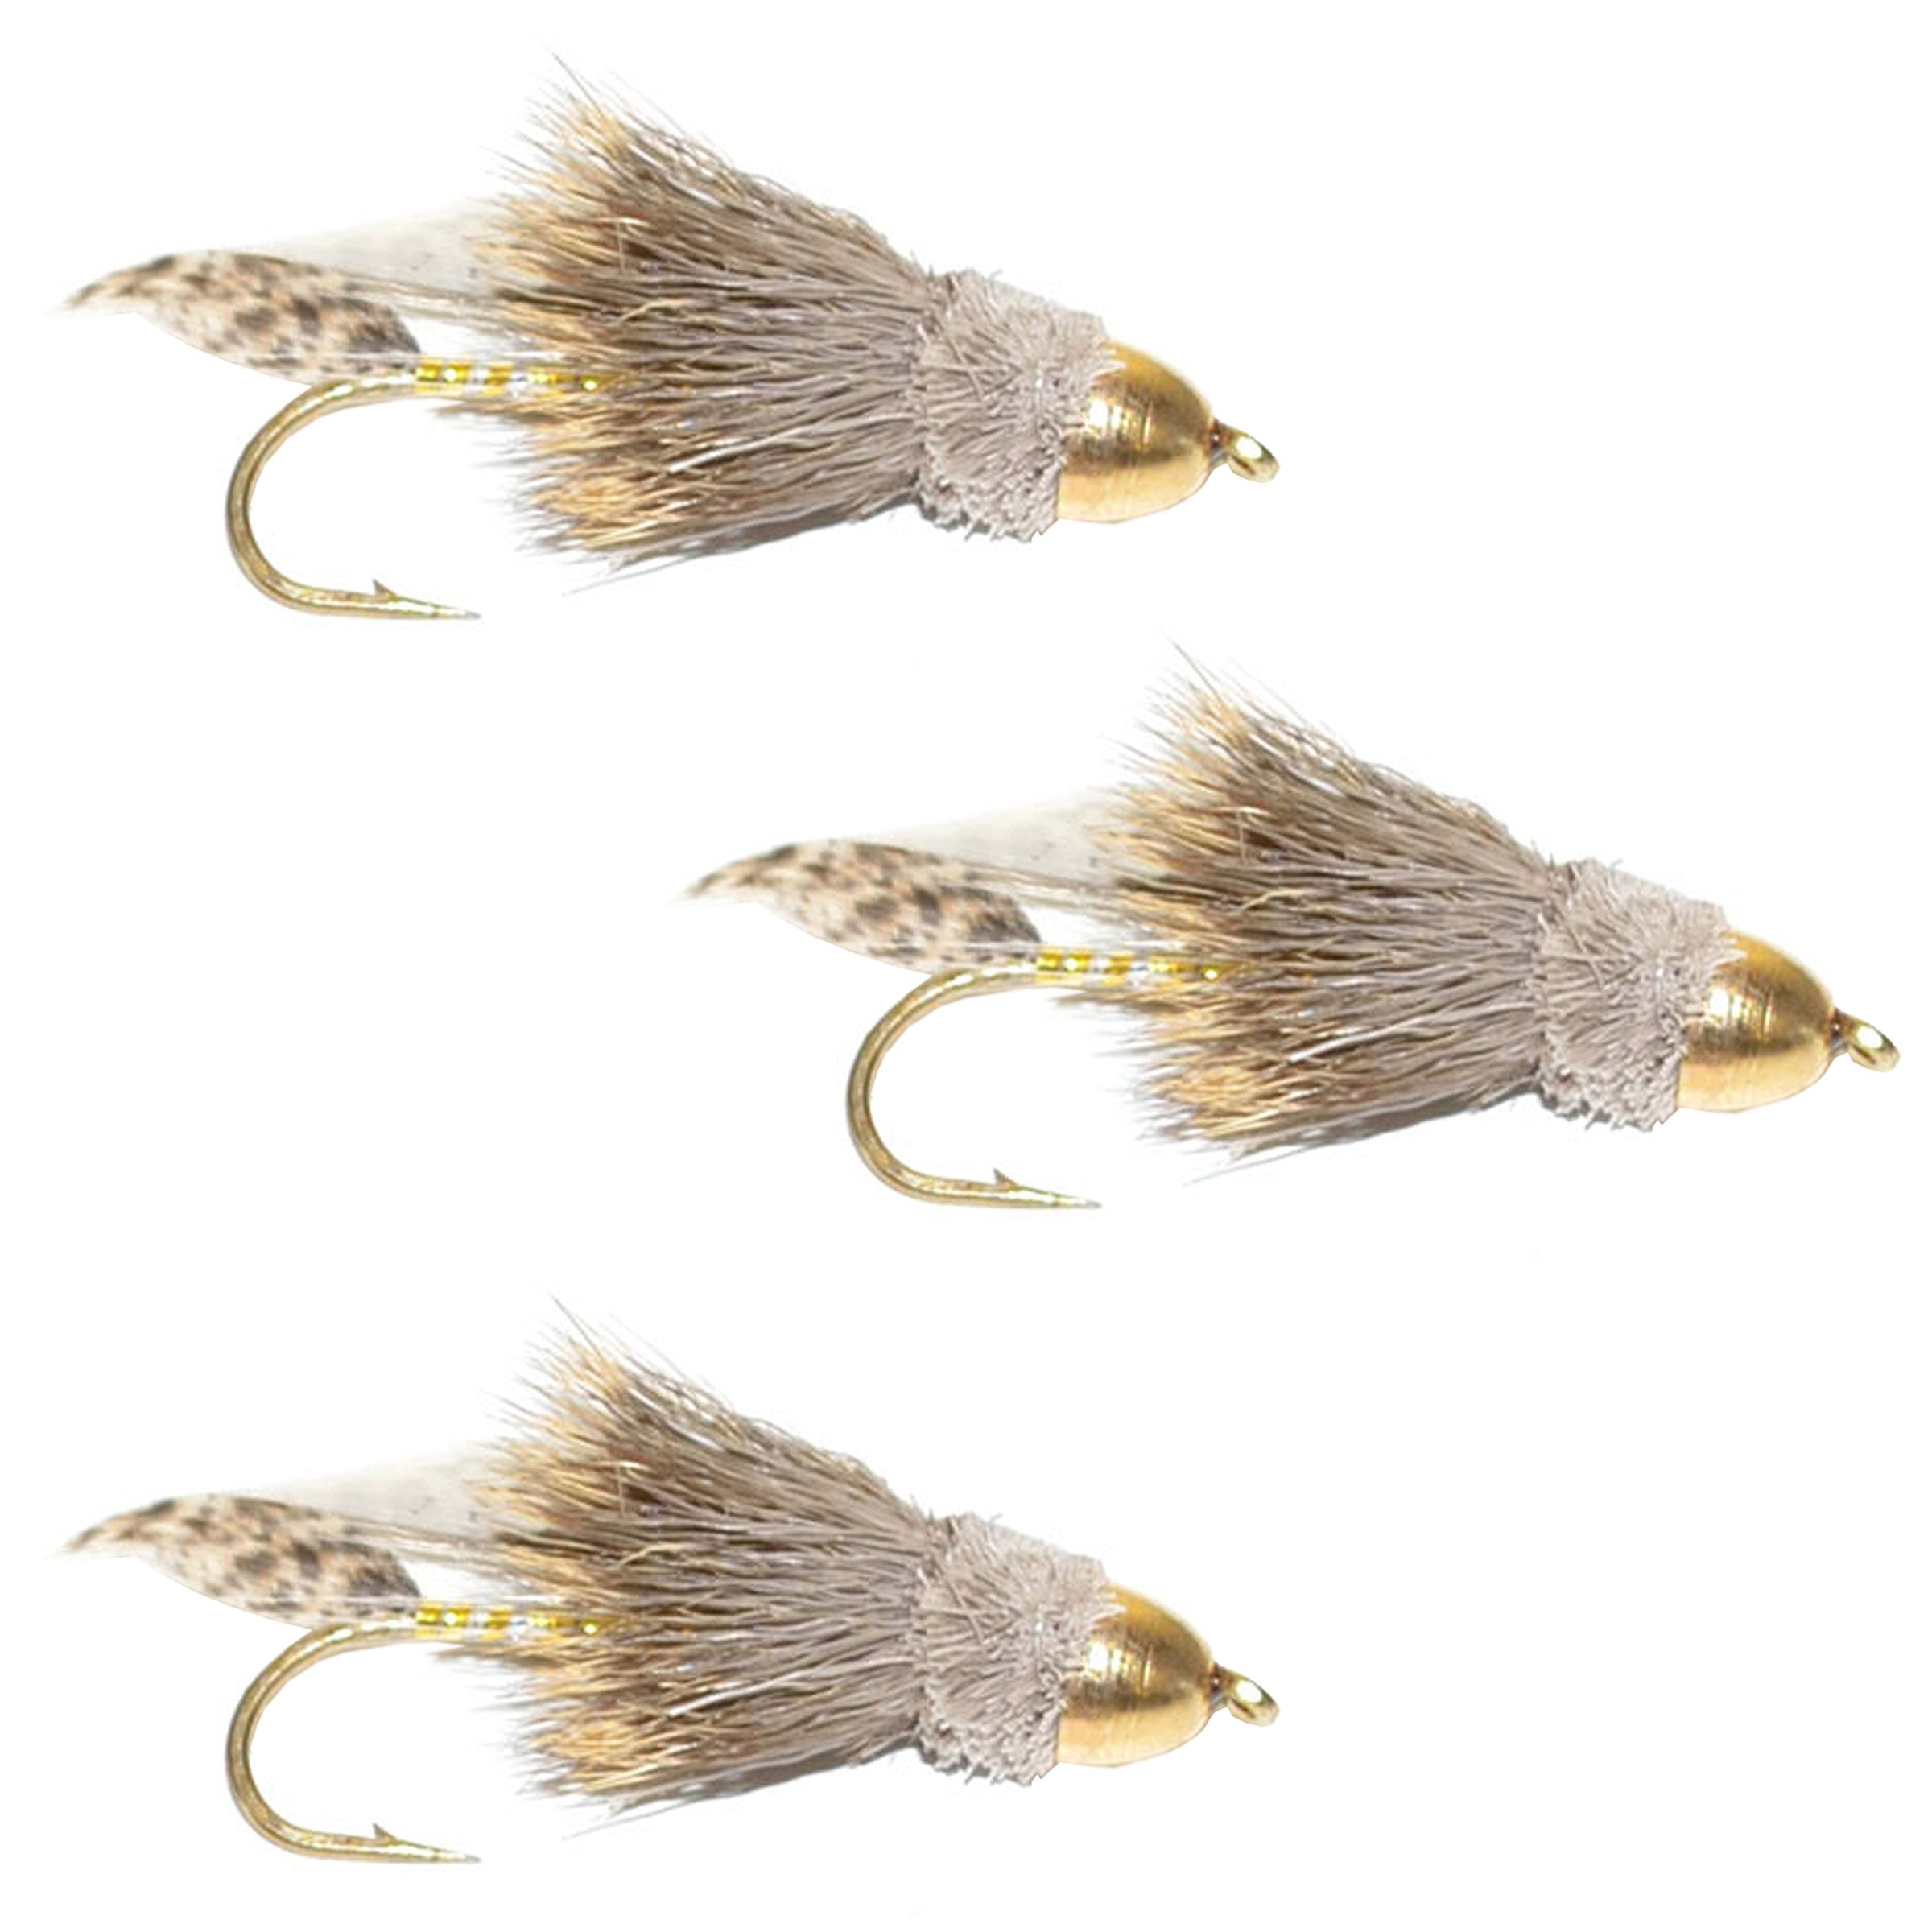 3 Pack Cone Head Muddler Minnow Trout and Bass Streamer Fly - Hook Size 10